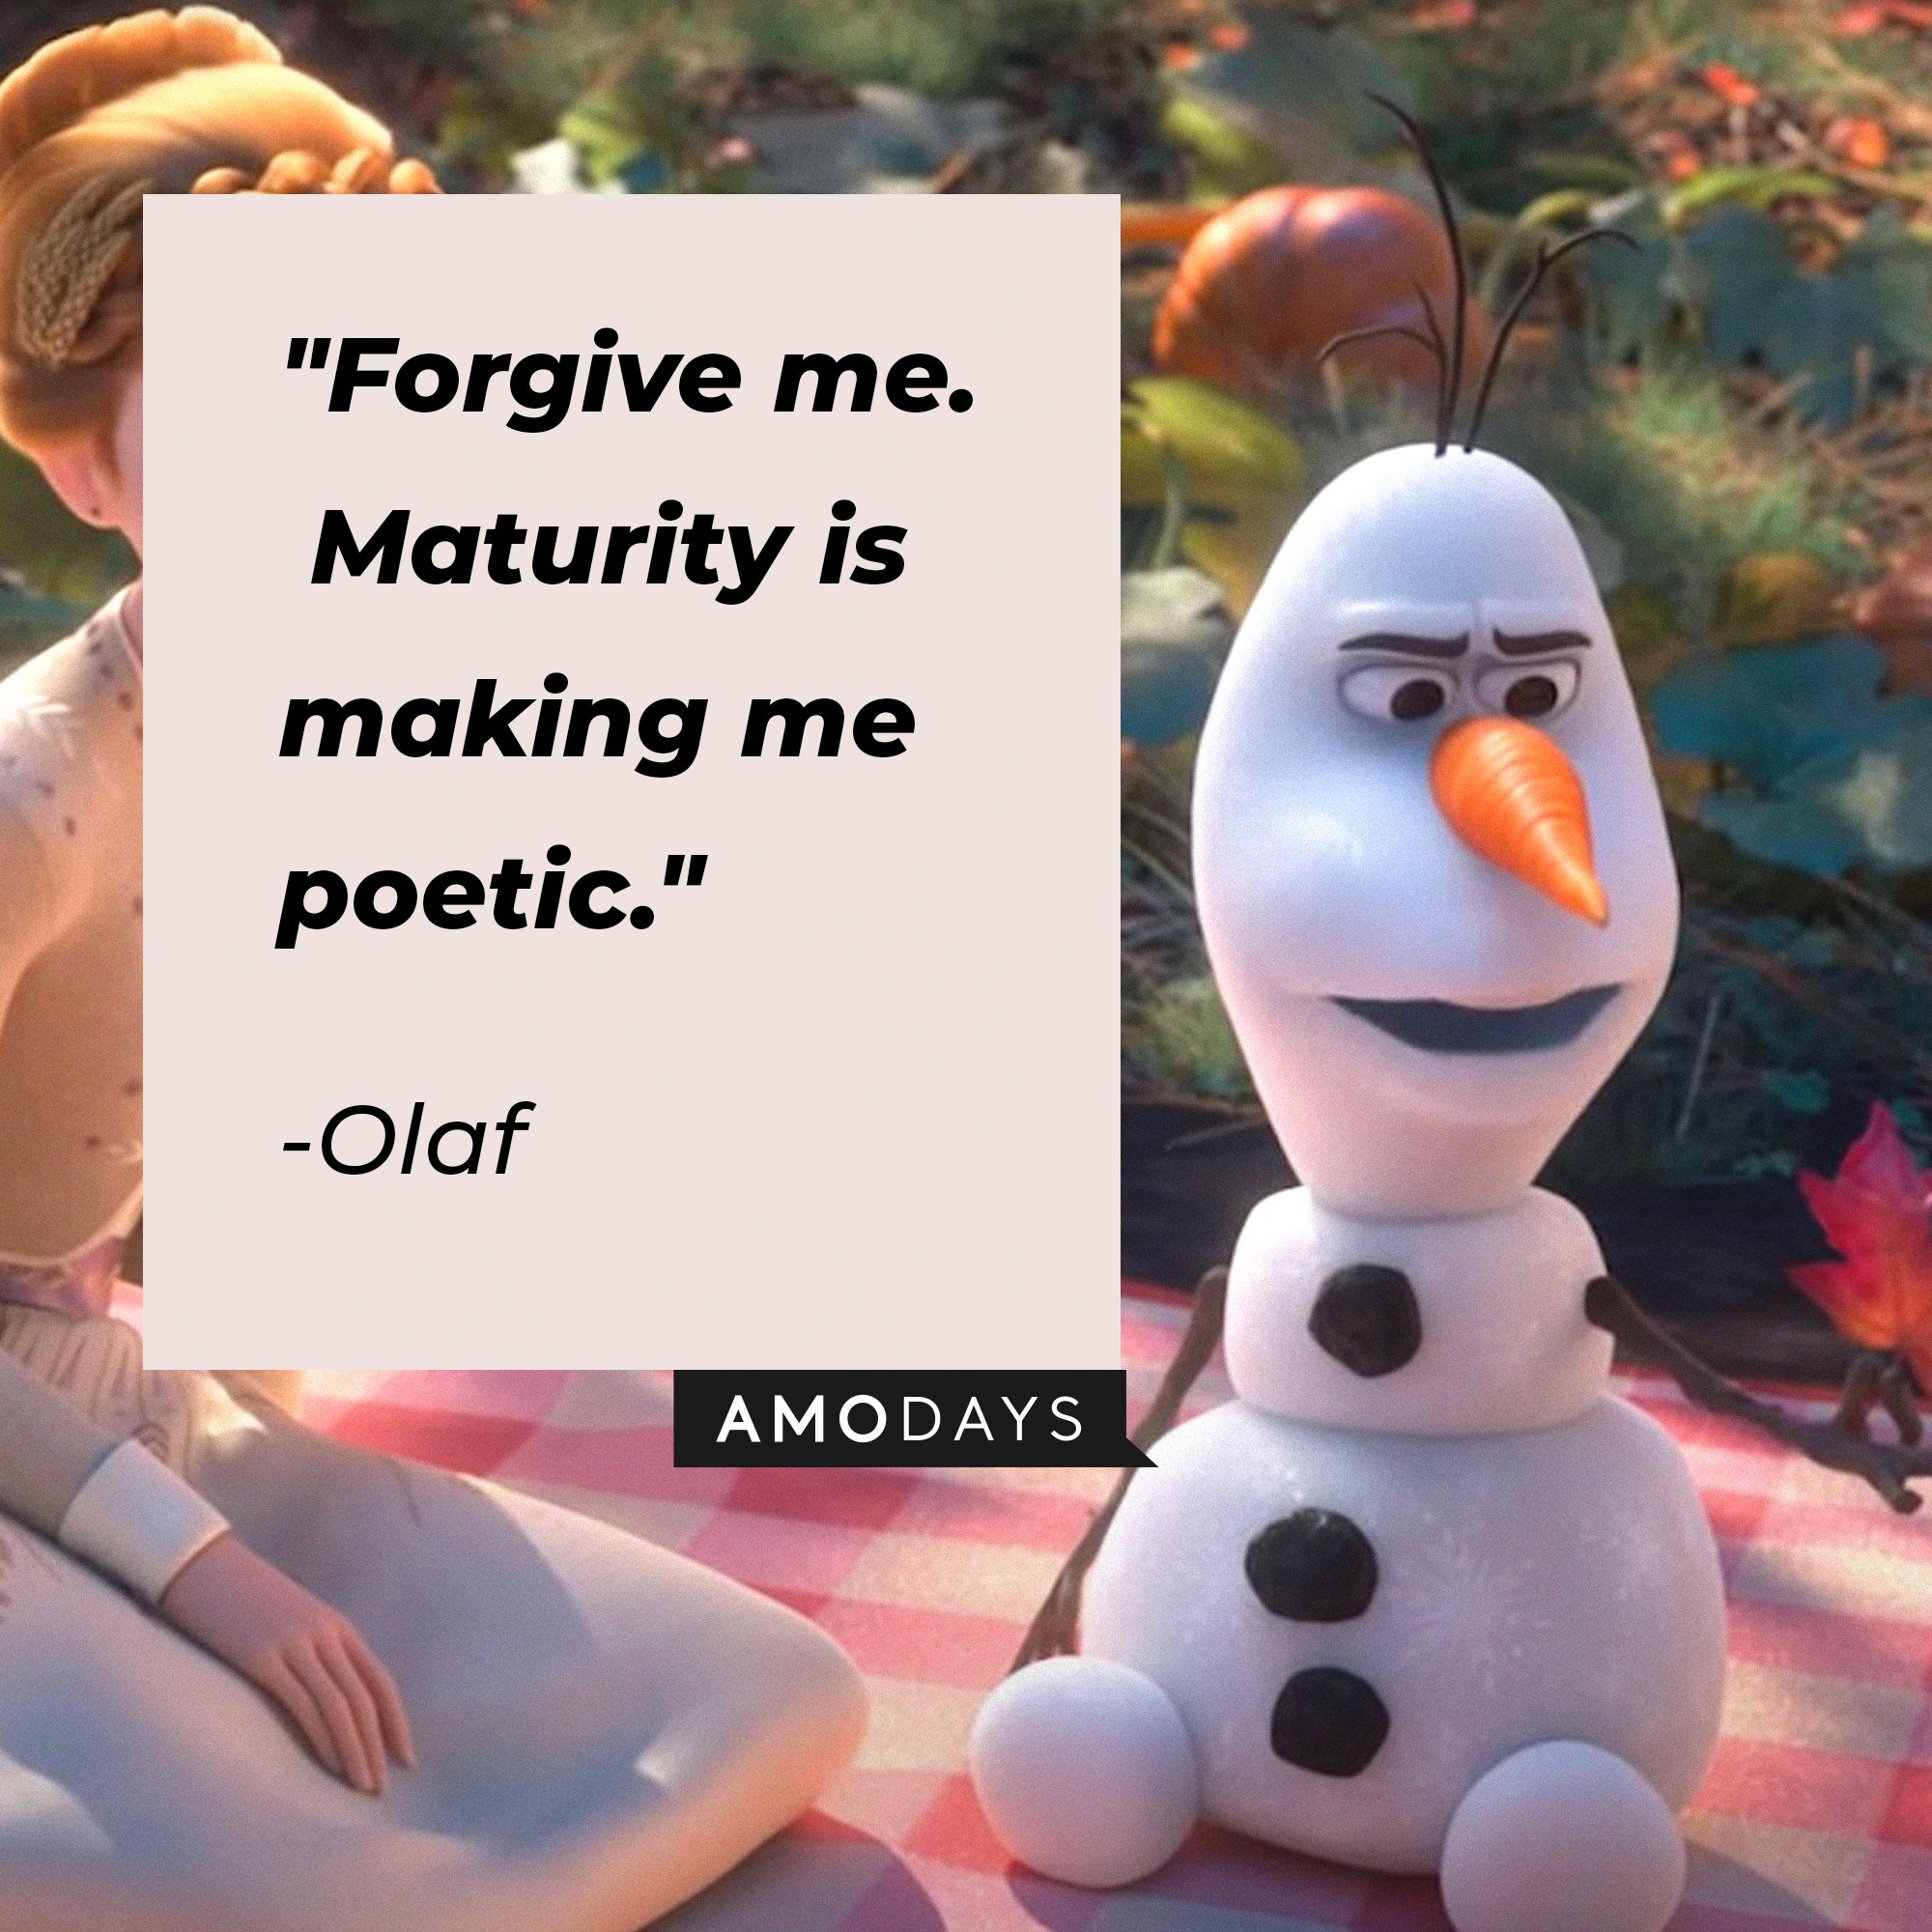 Olaf’s quote: "Forgive me. Maturity is making me poetic." | Image: AmoDays  